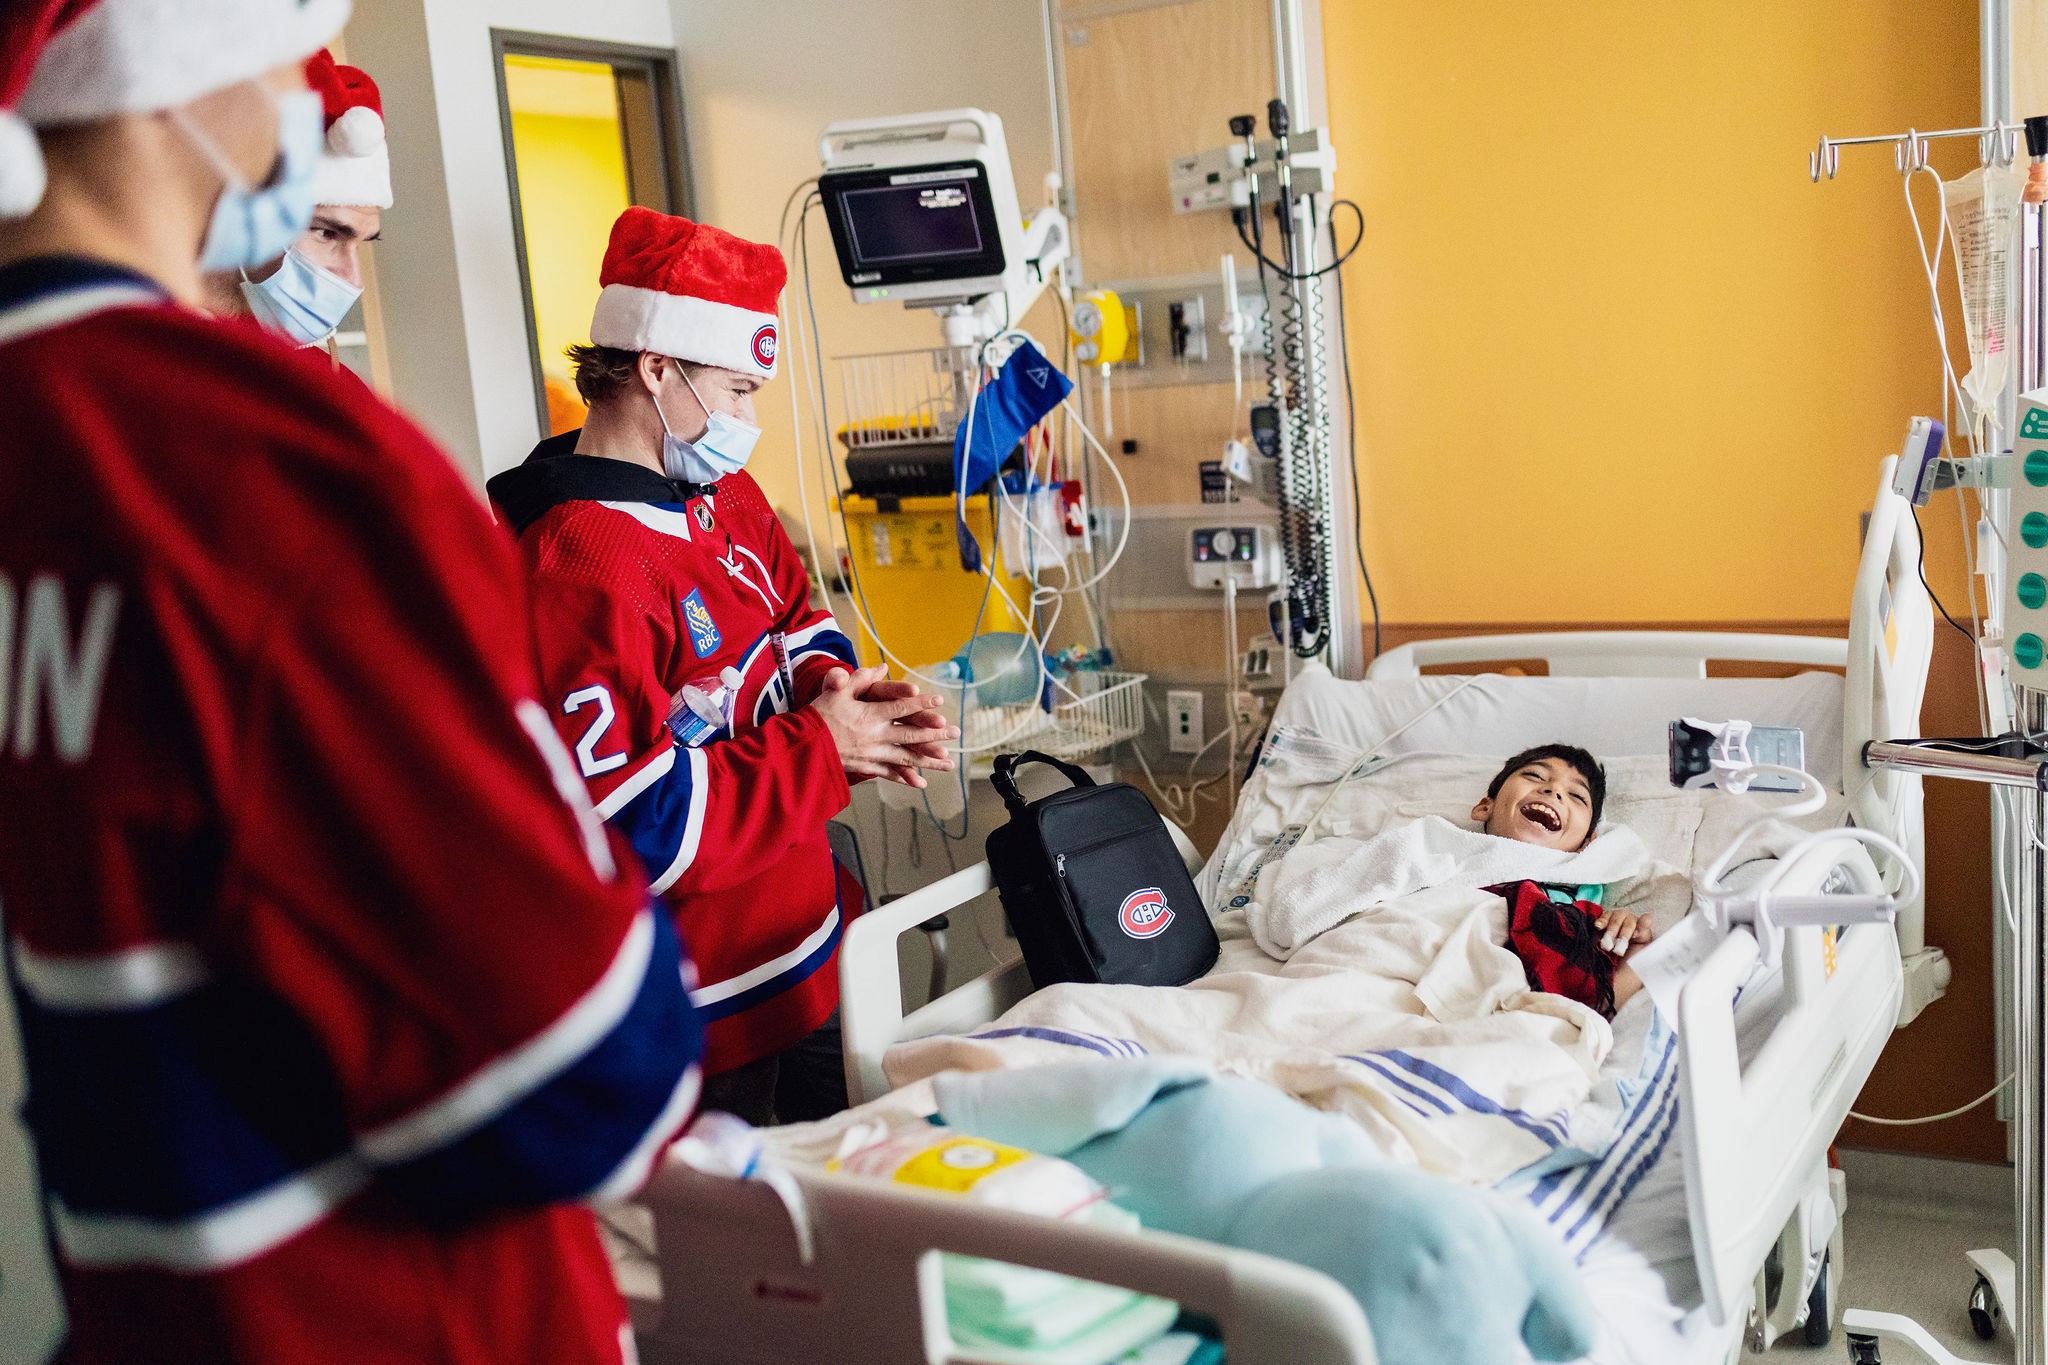 The Habs visit the Montreal Children's Hospital